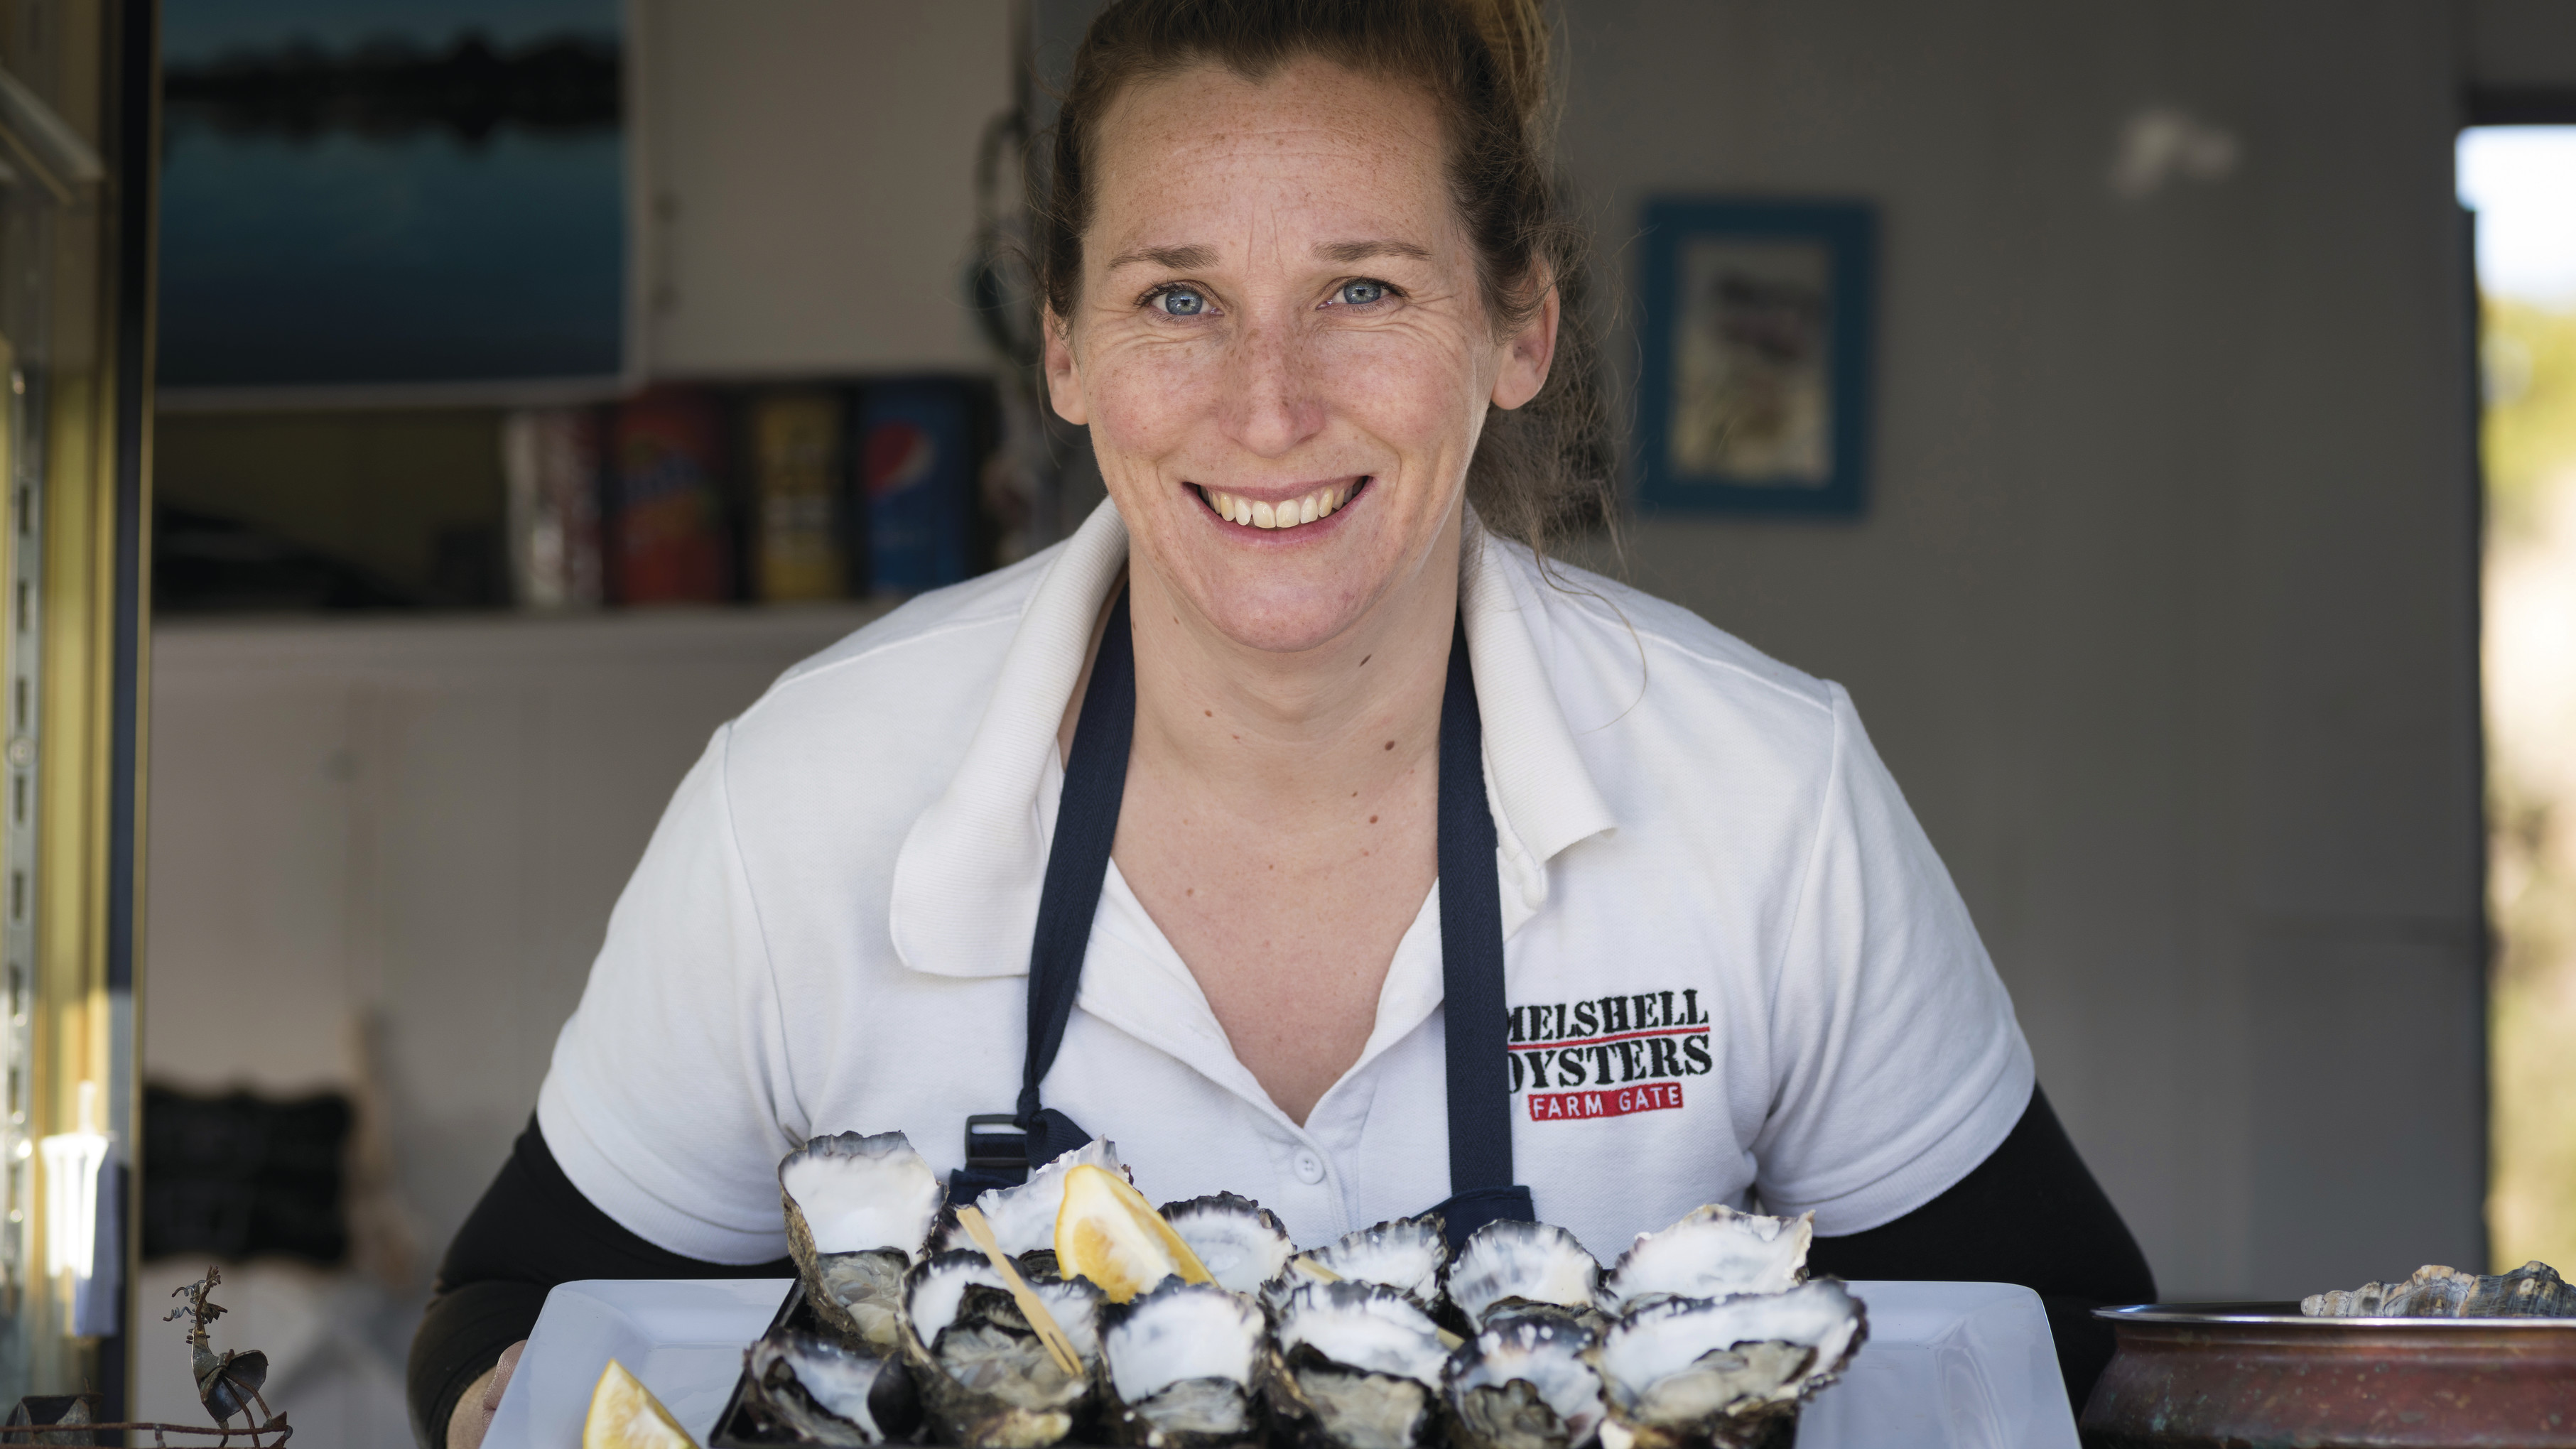 Cassy Melrose smiling at the camera and holding a large platter of fresh oysters with lemon wedges.